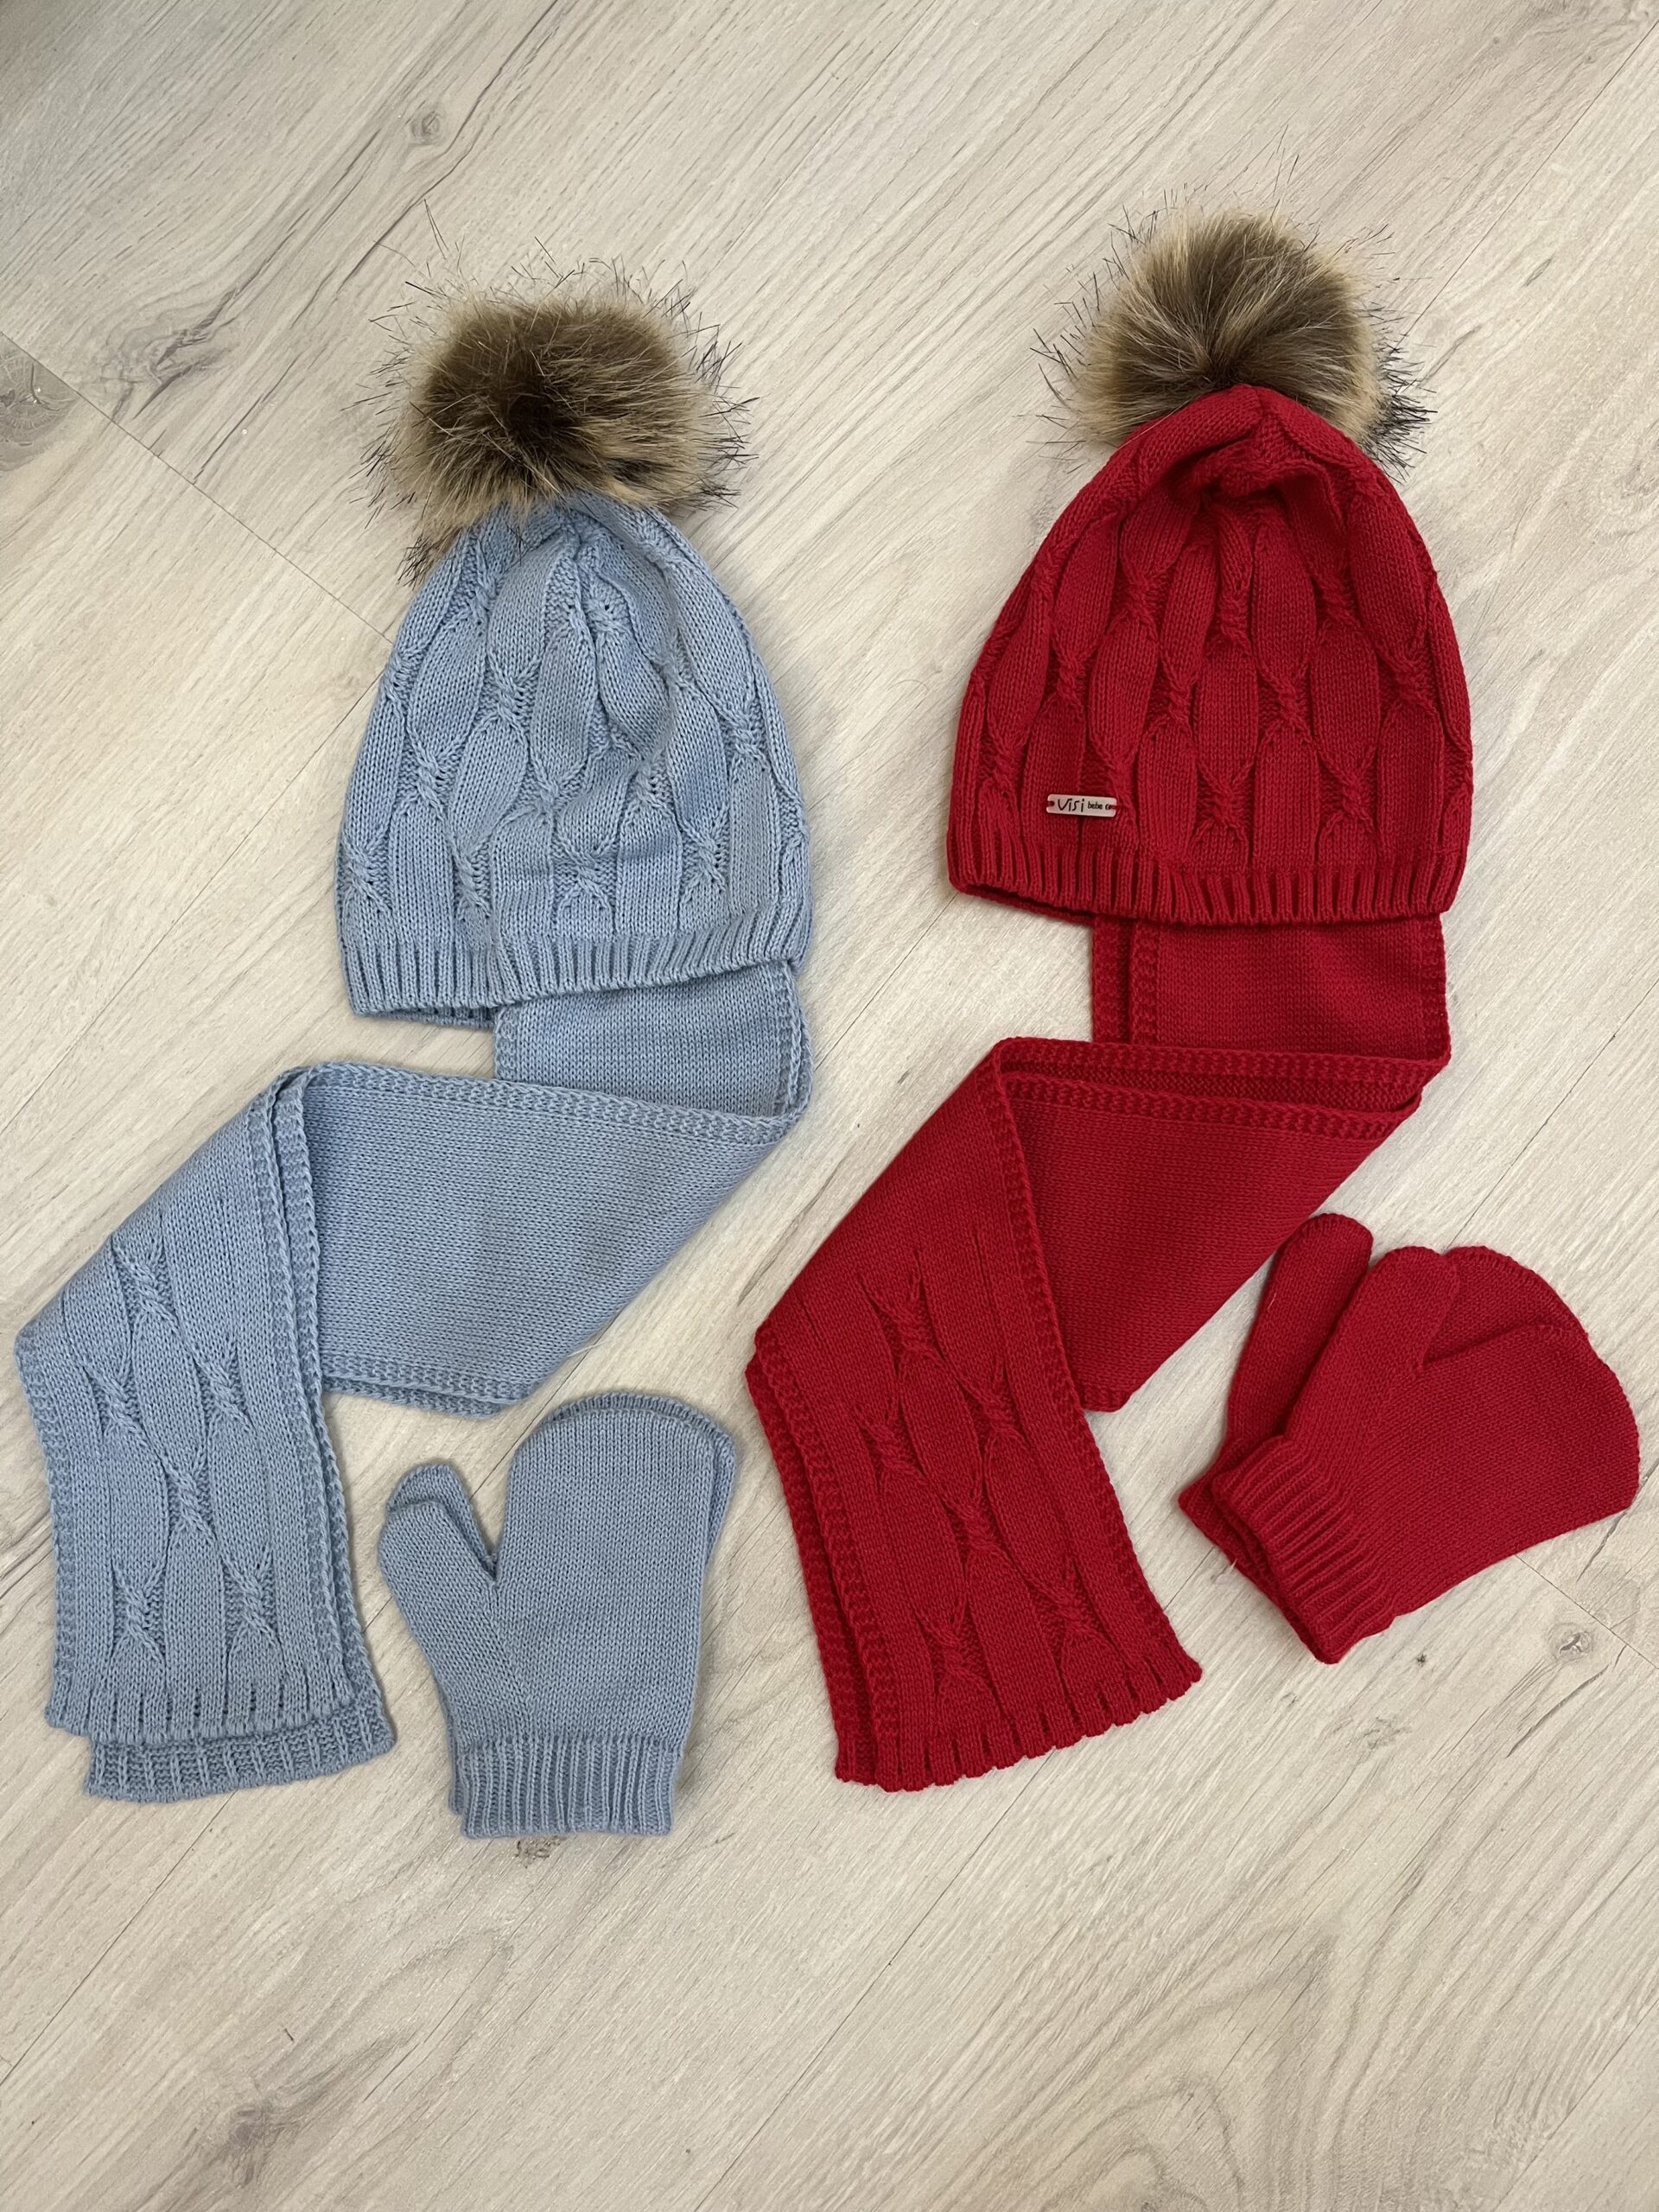 Hat-Scarf with mittens set